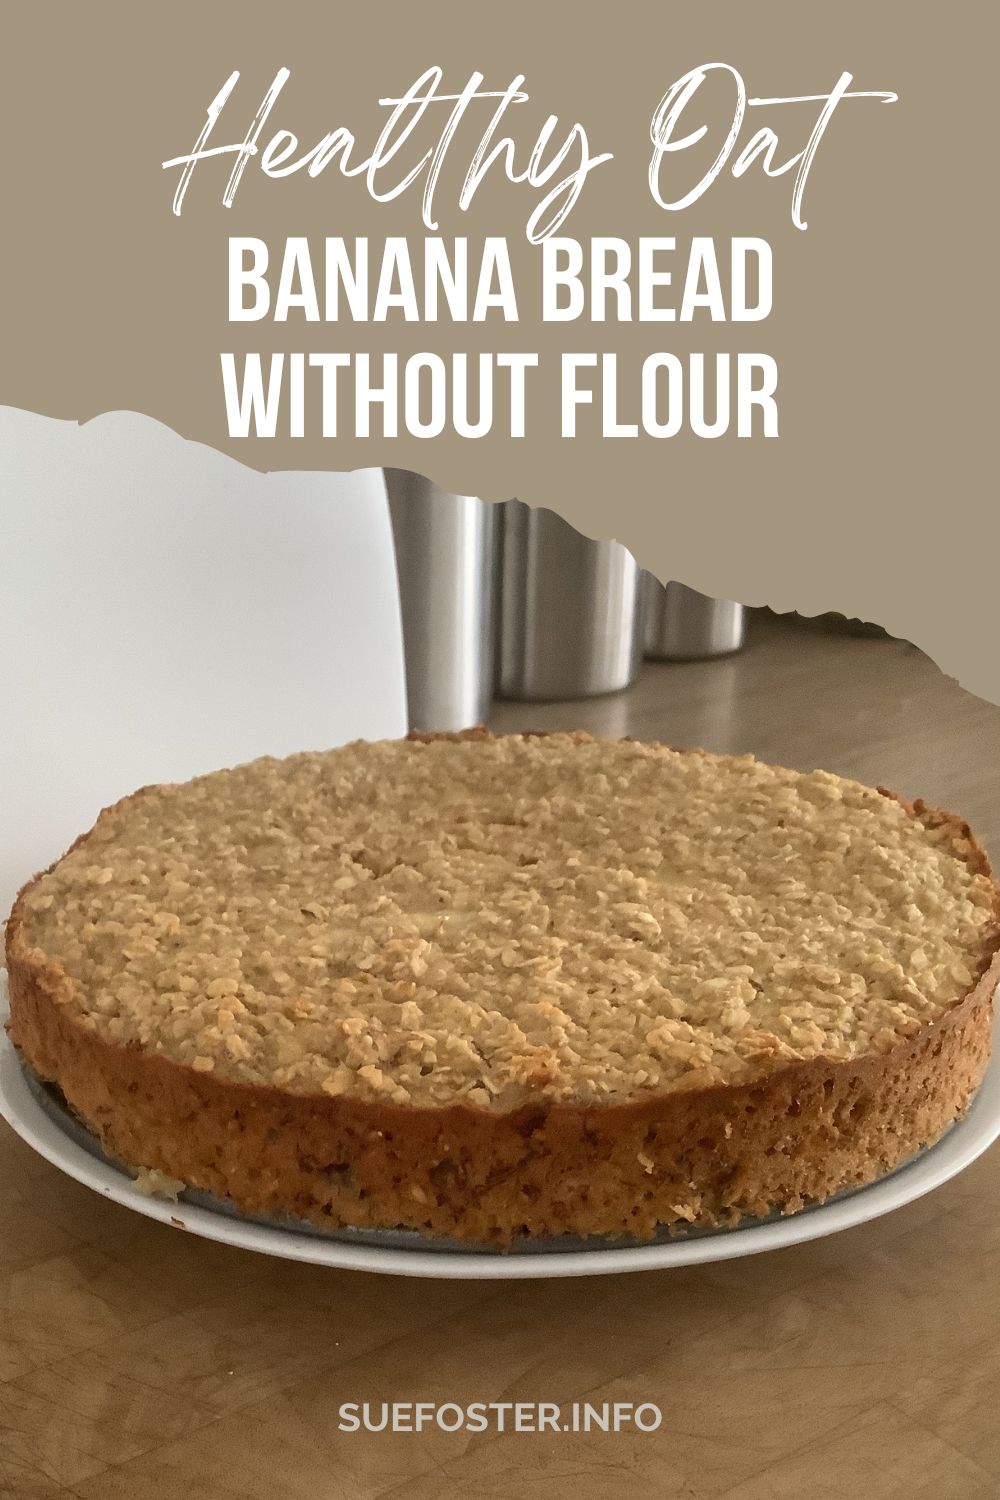 This healthy oat banana bread recipe uses ripe bananas and oats, it's an ideal option when you're out of flour or just want to try something new.